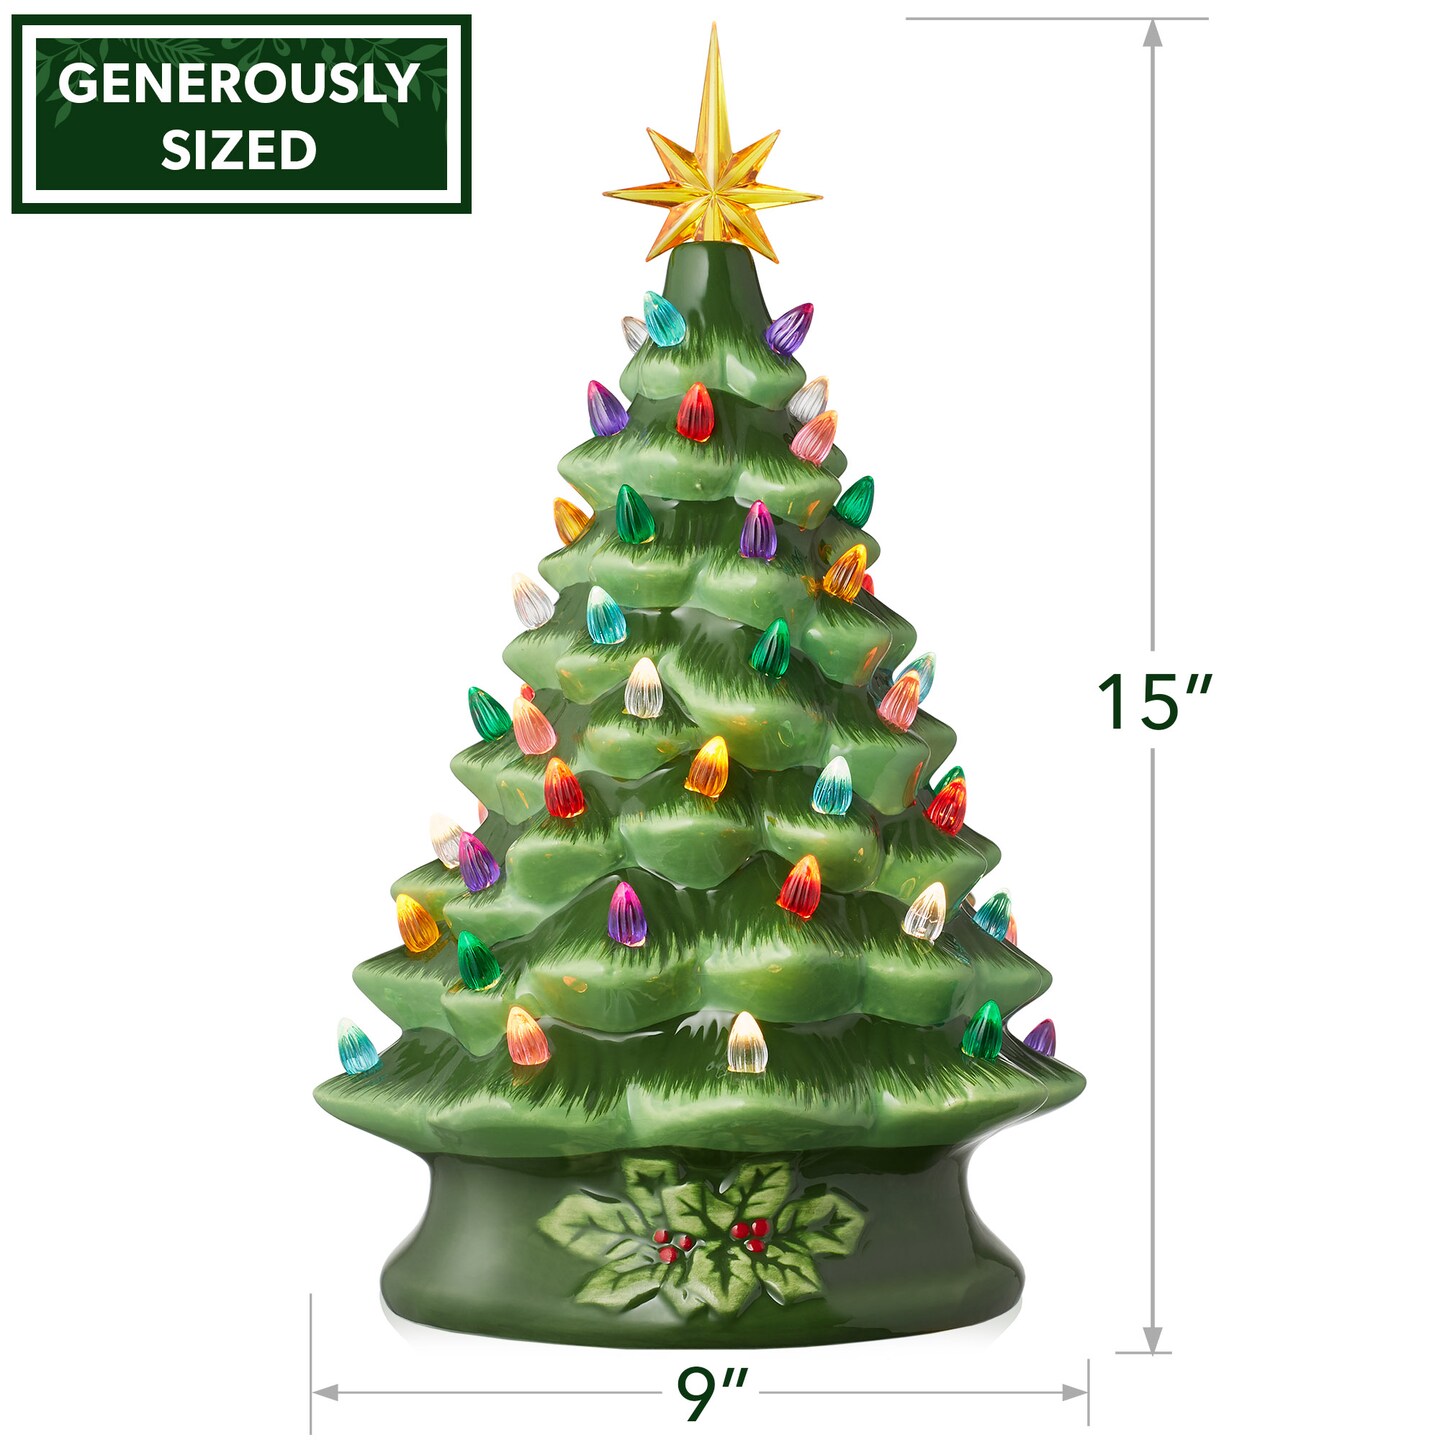 Casafield Hand Painted Ceramic Christmas Tree, Green 15-Inch Pre-Lit Tree with 128 Multi Color Lights and 2 Star Toppers